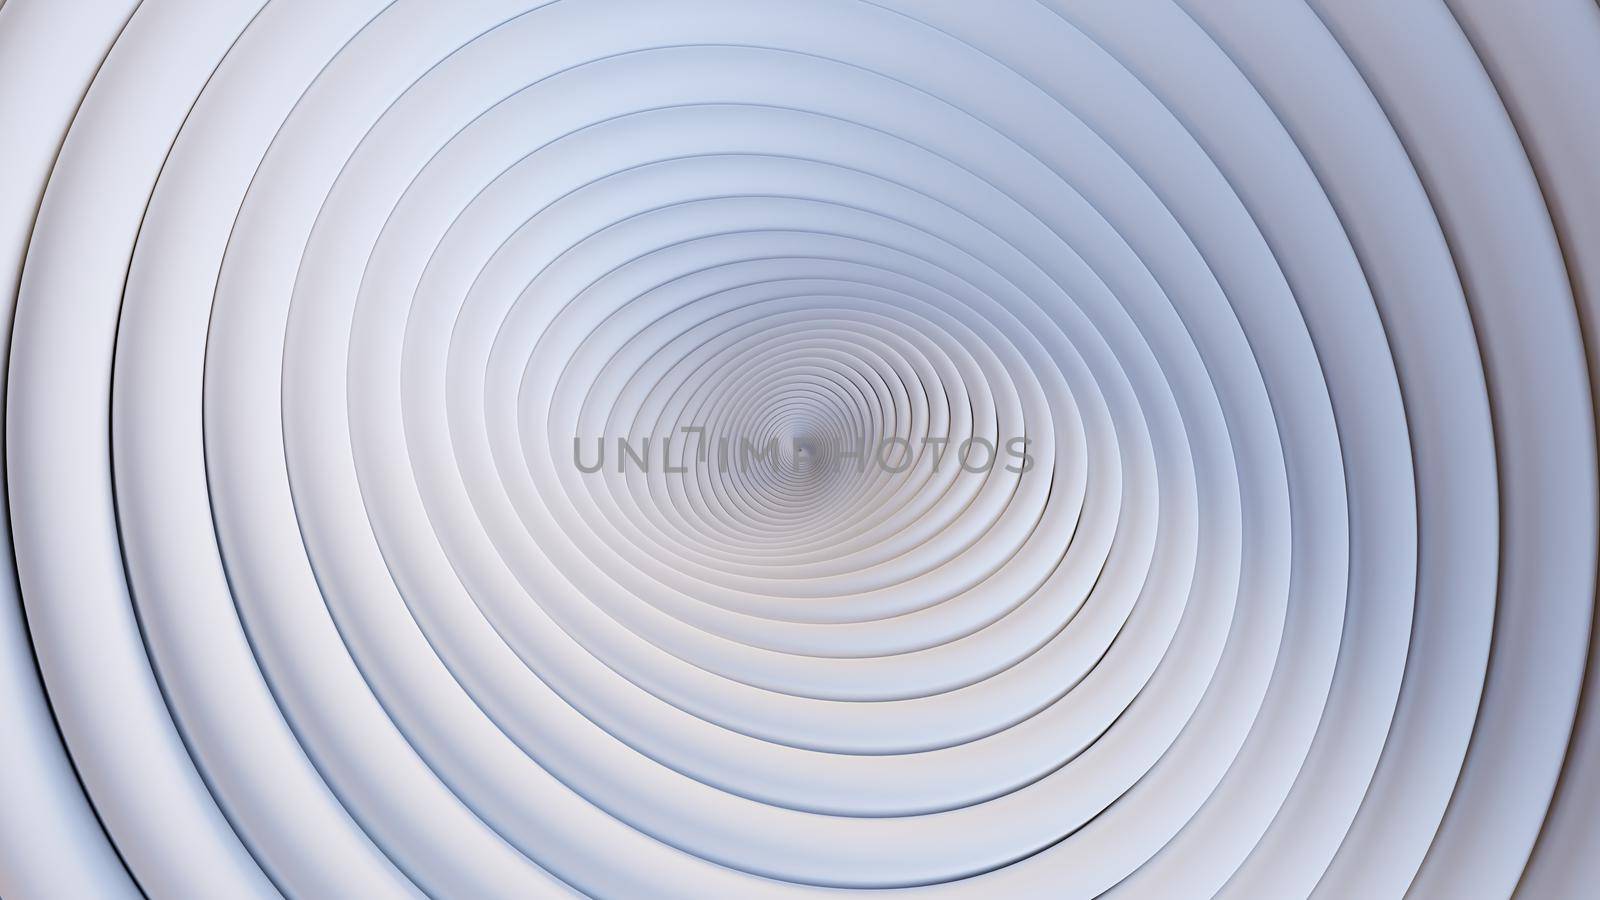 Abstract template of white circular waves by cherezoff